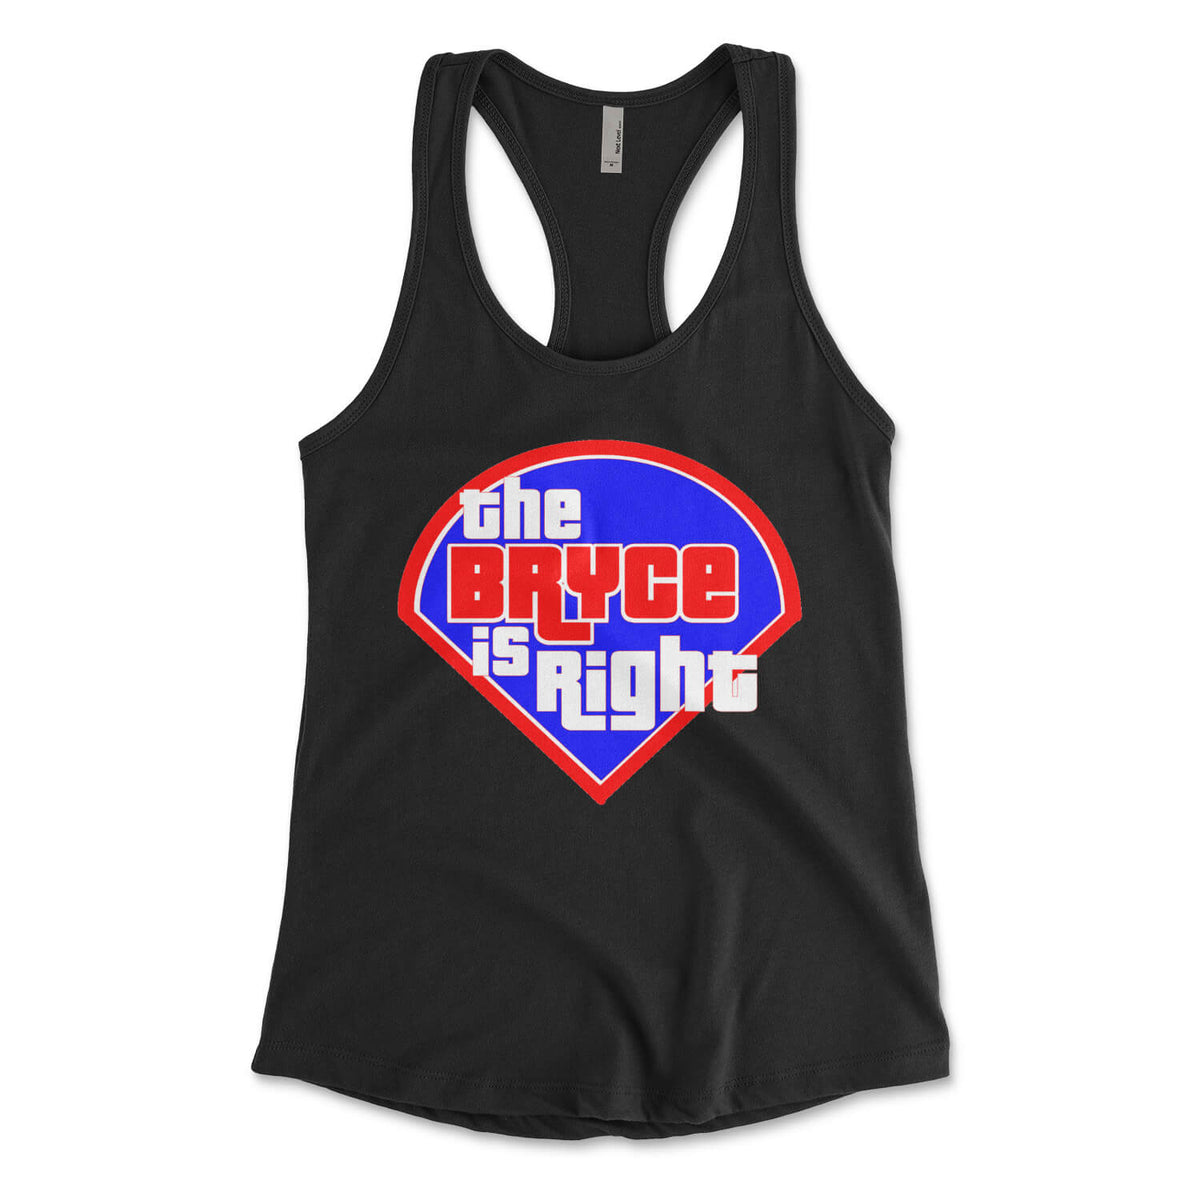 Philadelphia Phillies Bryce Harper the Bryce Is Right womens black racerback tank top from Phillygoat